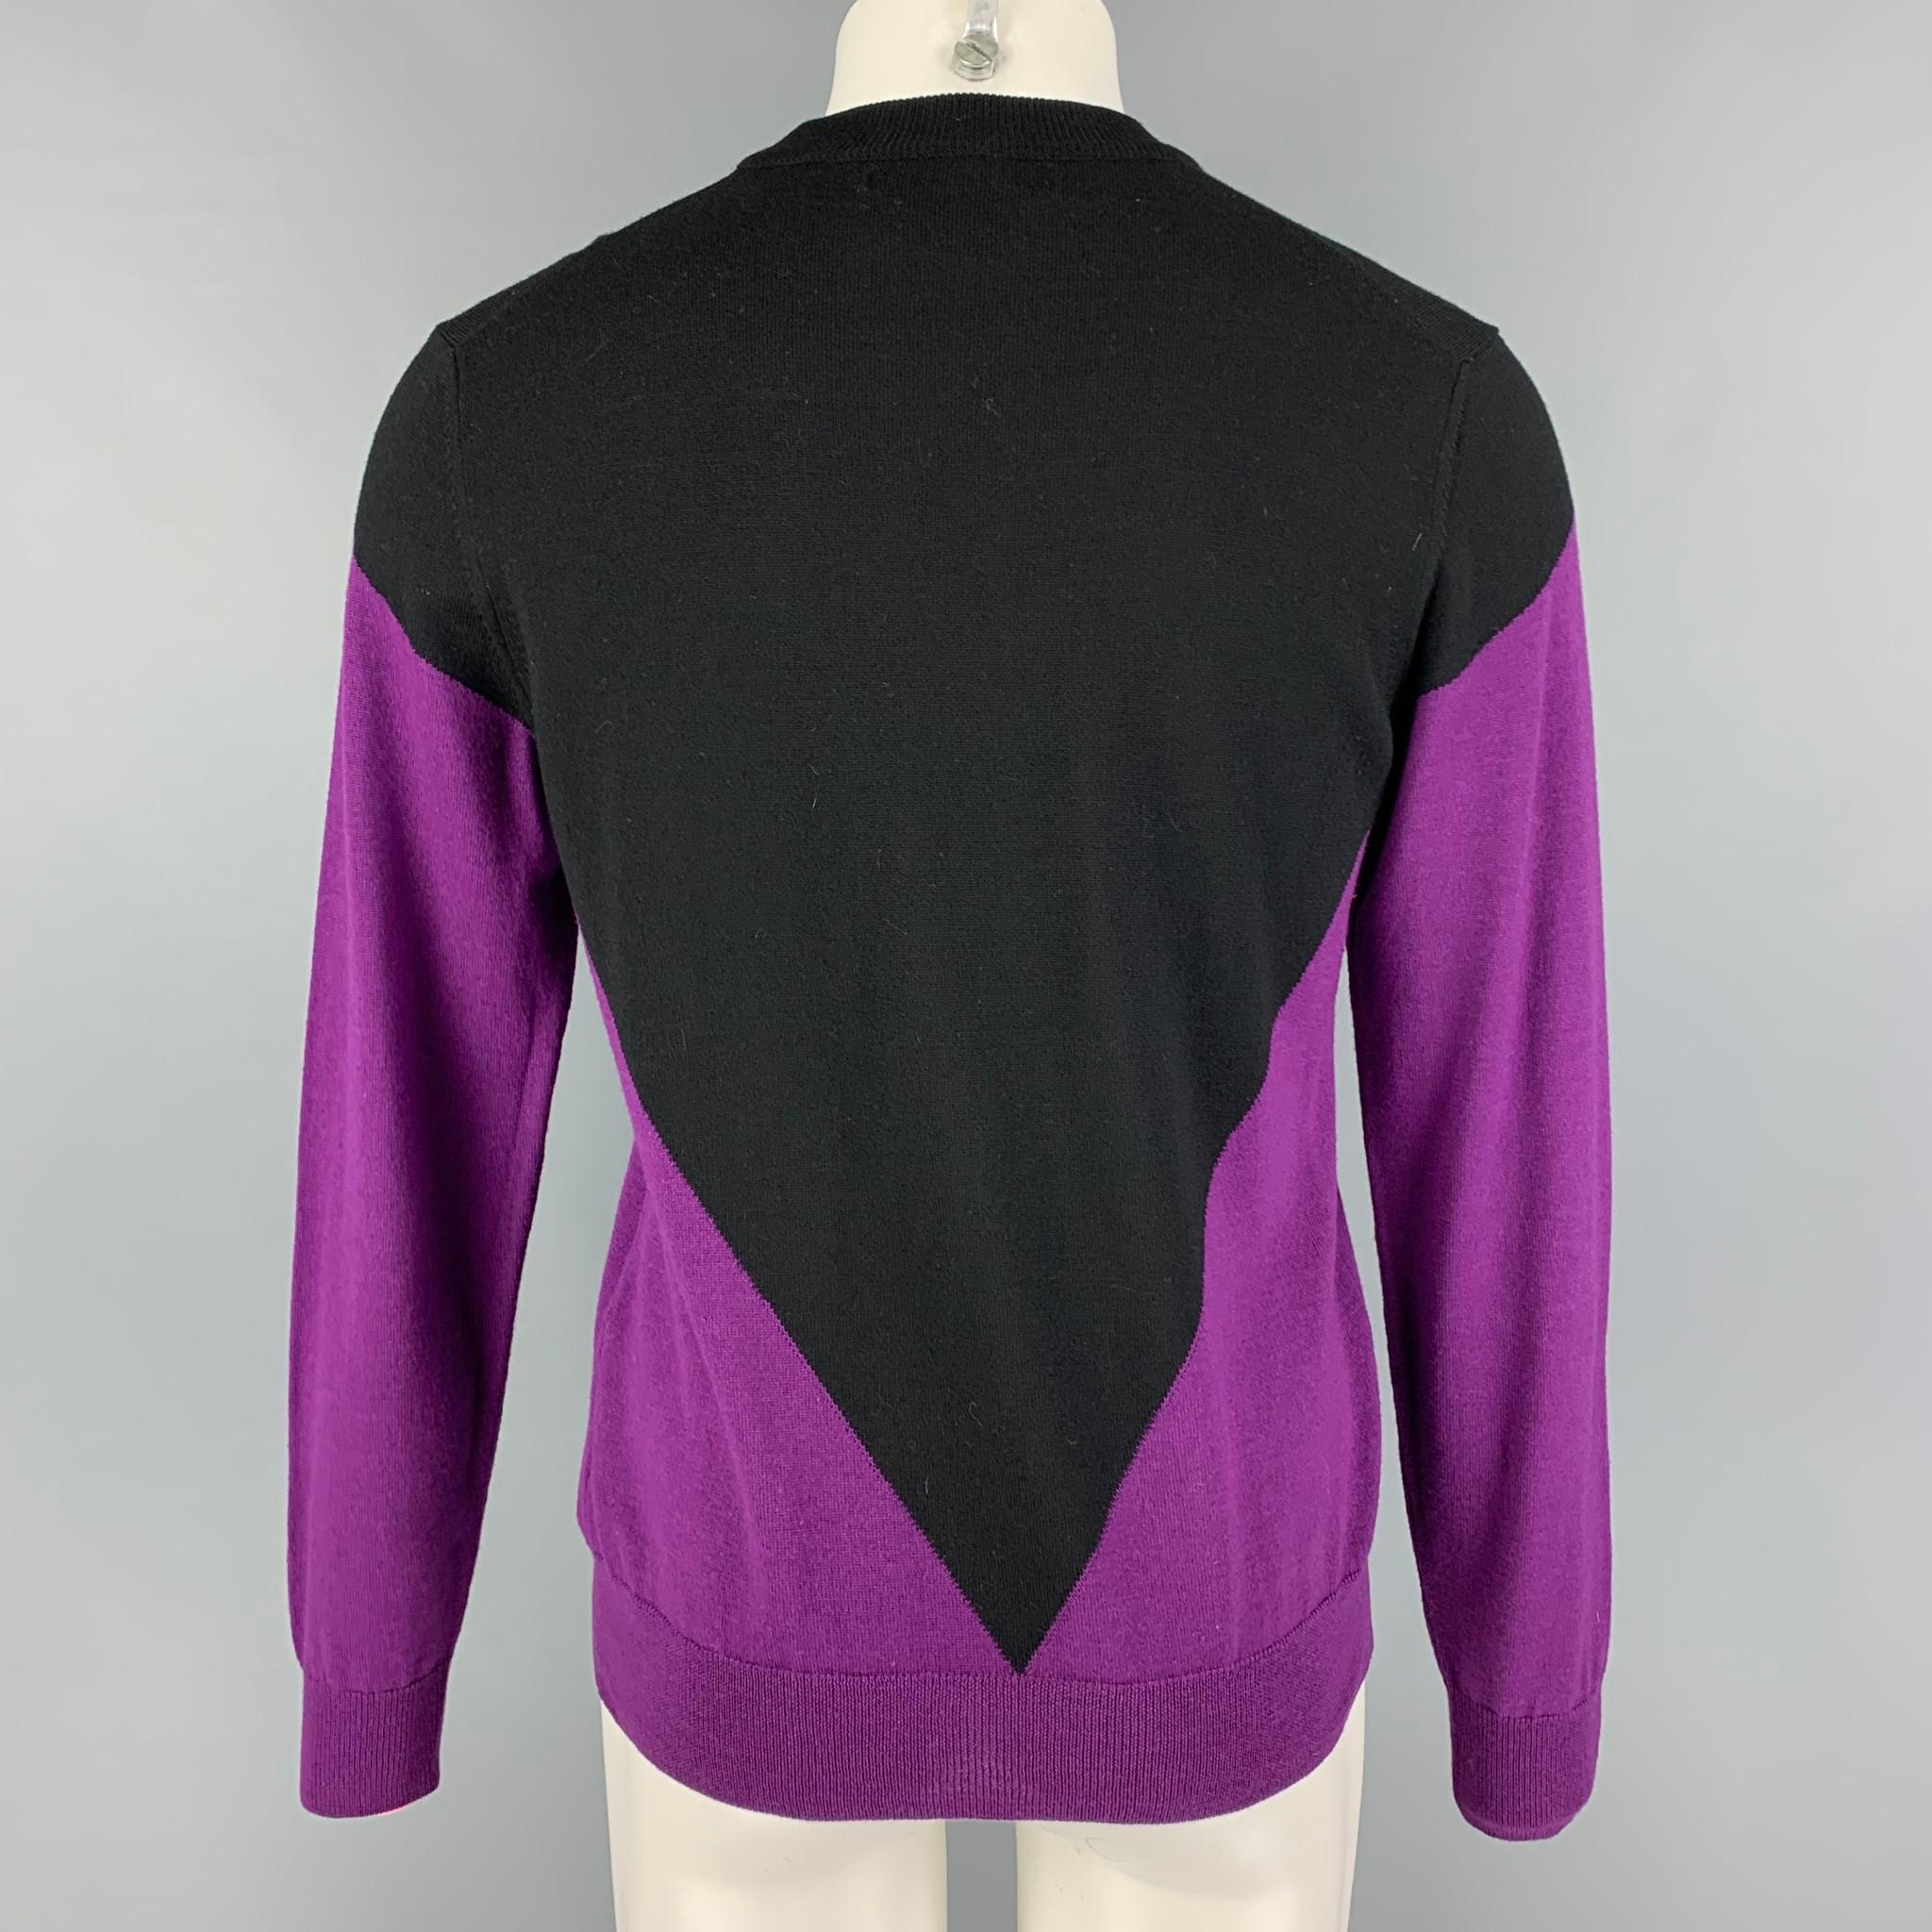 VETEMENTS x COMME des GARCONS SHIRT SS17 Size M Black Purple Graphic Sweater In Good Condition In San Francisco, CA